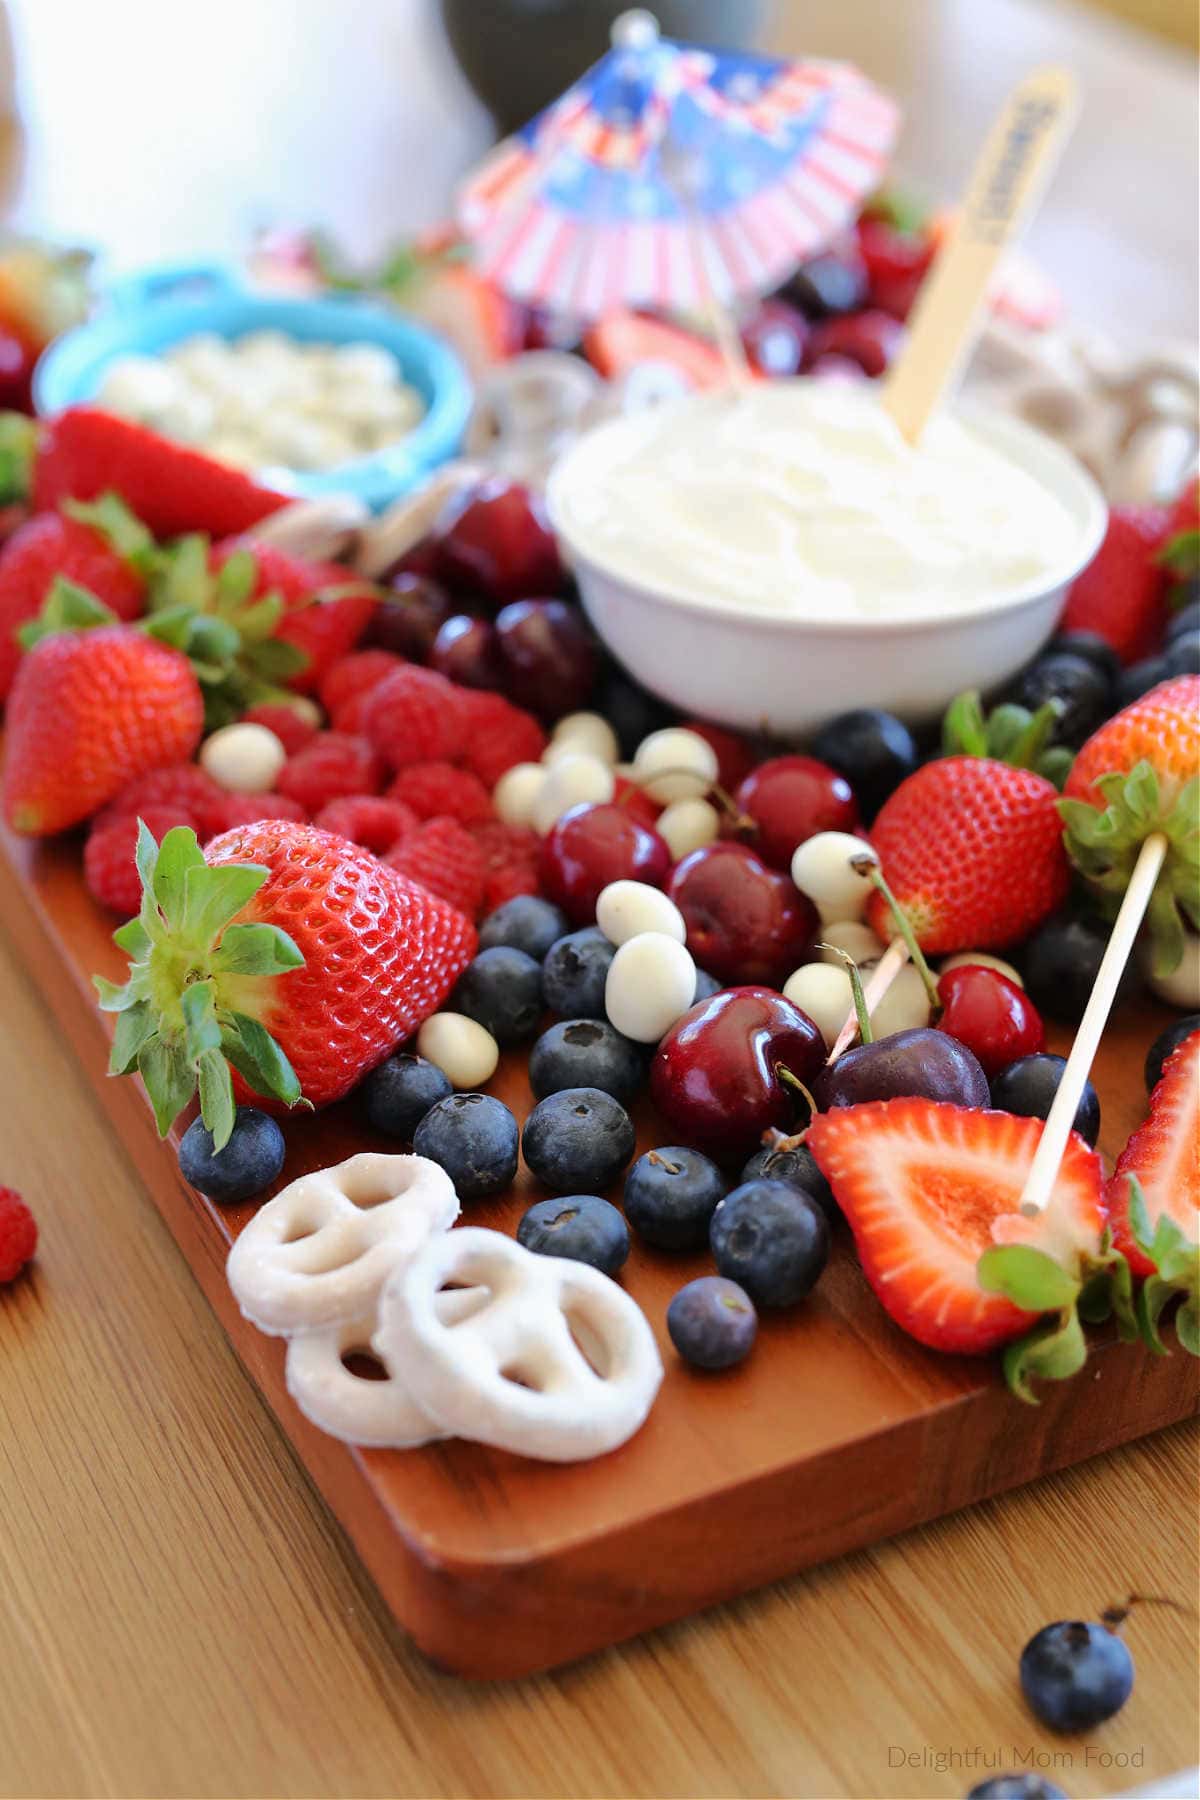 Red White and Blue Fruit platter presentation Ideas using blueberries cherries and strawberries on a wood cutting board